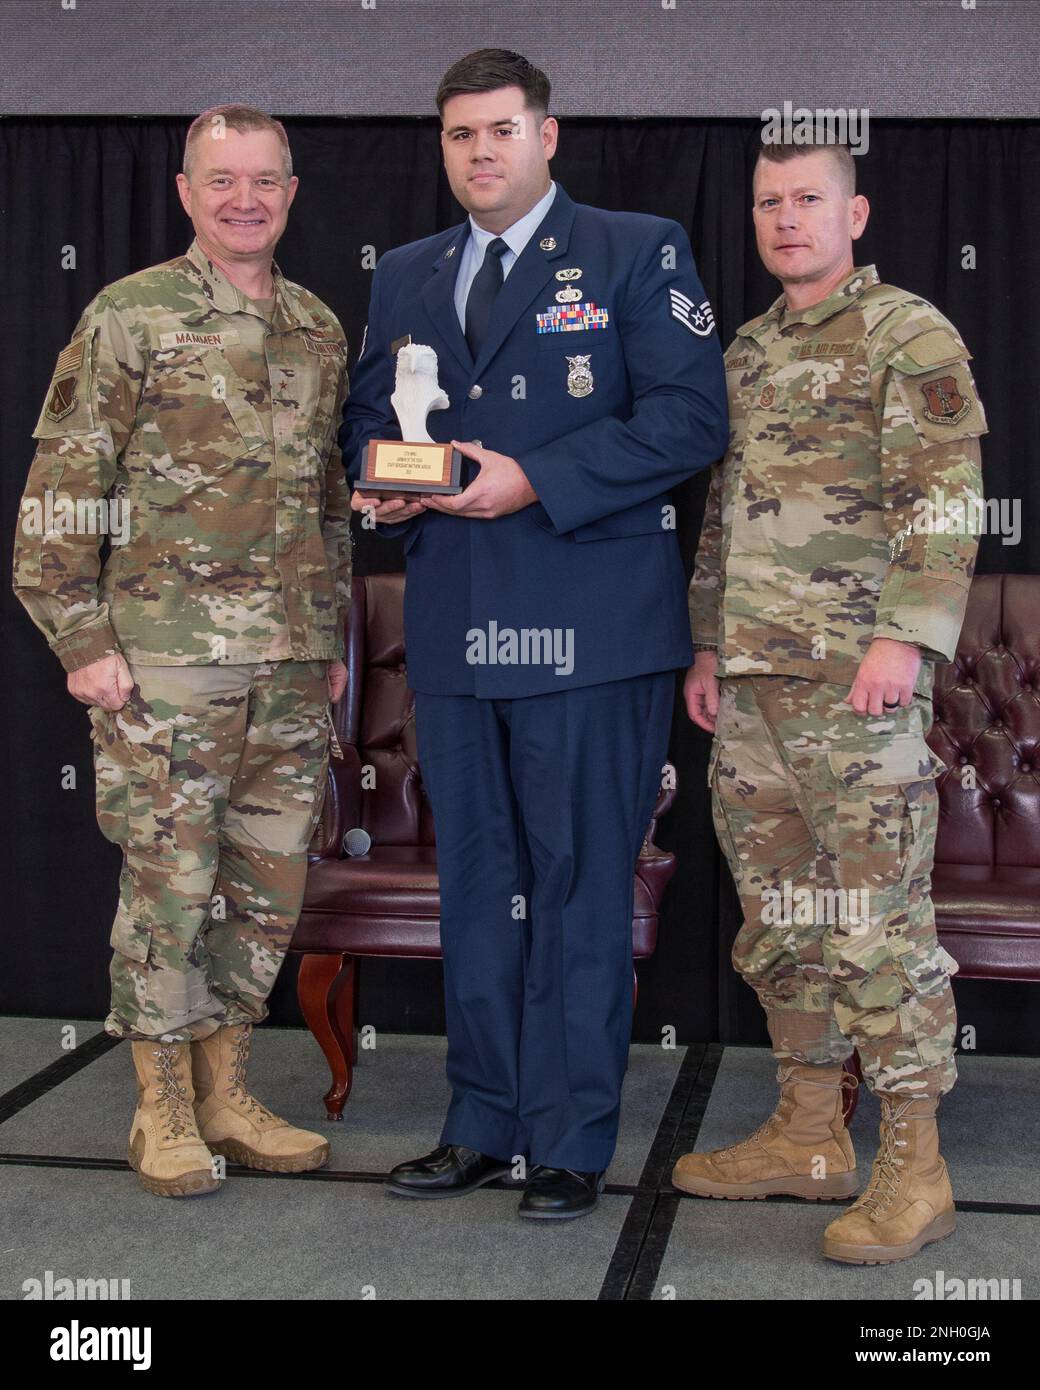 Brig. Gen. Rolf Mammen, 127th Wing Commander, Staff Sgt. Matthew Jarecki, firefighter, 127th Civil Engineer Squadron and Chief Master Sgt. Rick Gordon, 127th Wing command chief, based in Selfridge Air National Guard Base, Michigan, pose after awarding Jarecki the Wing’s outstanding airman of the year award. Jarecki and seven other individuals were awarded in different categories and will advance to the Michigan Air National Guard competition. Stock Photo